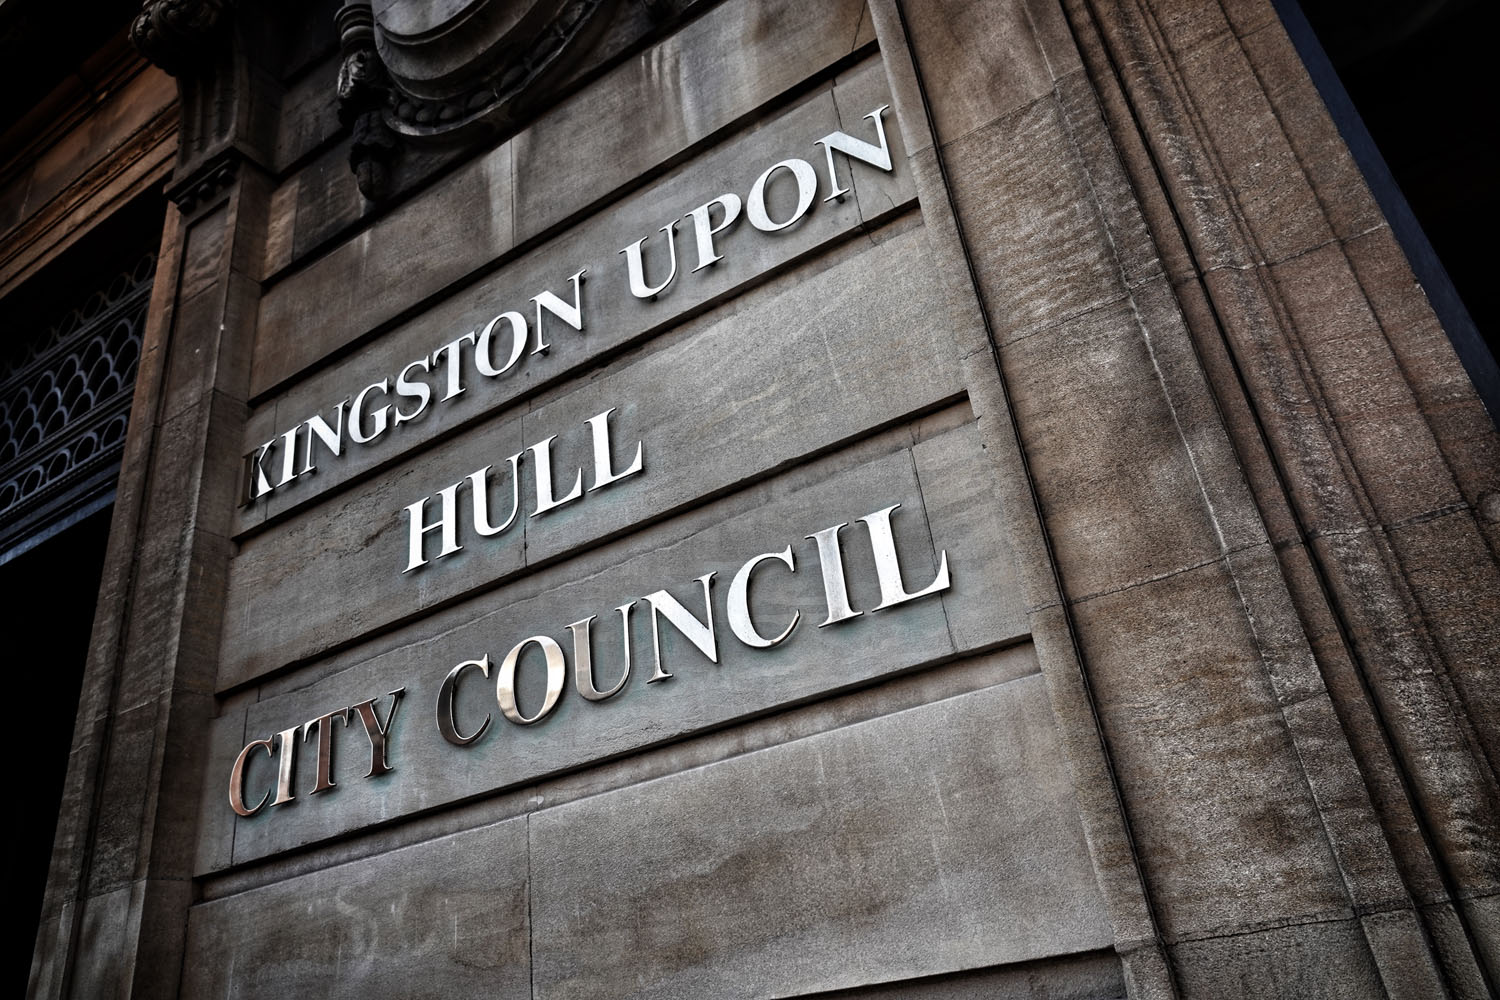 Hull city council Guildhall sign photograph